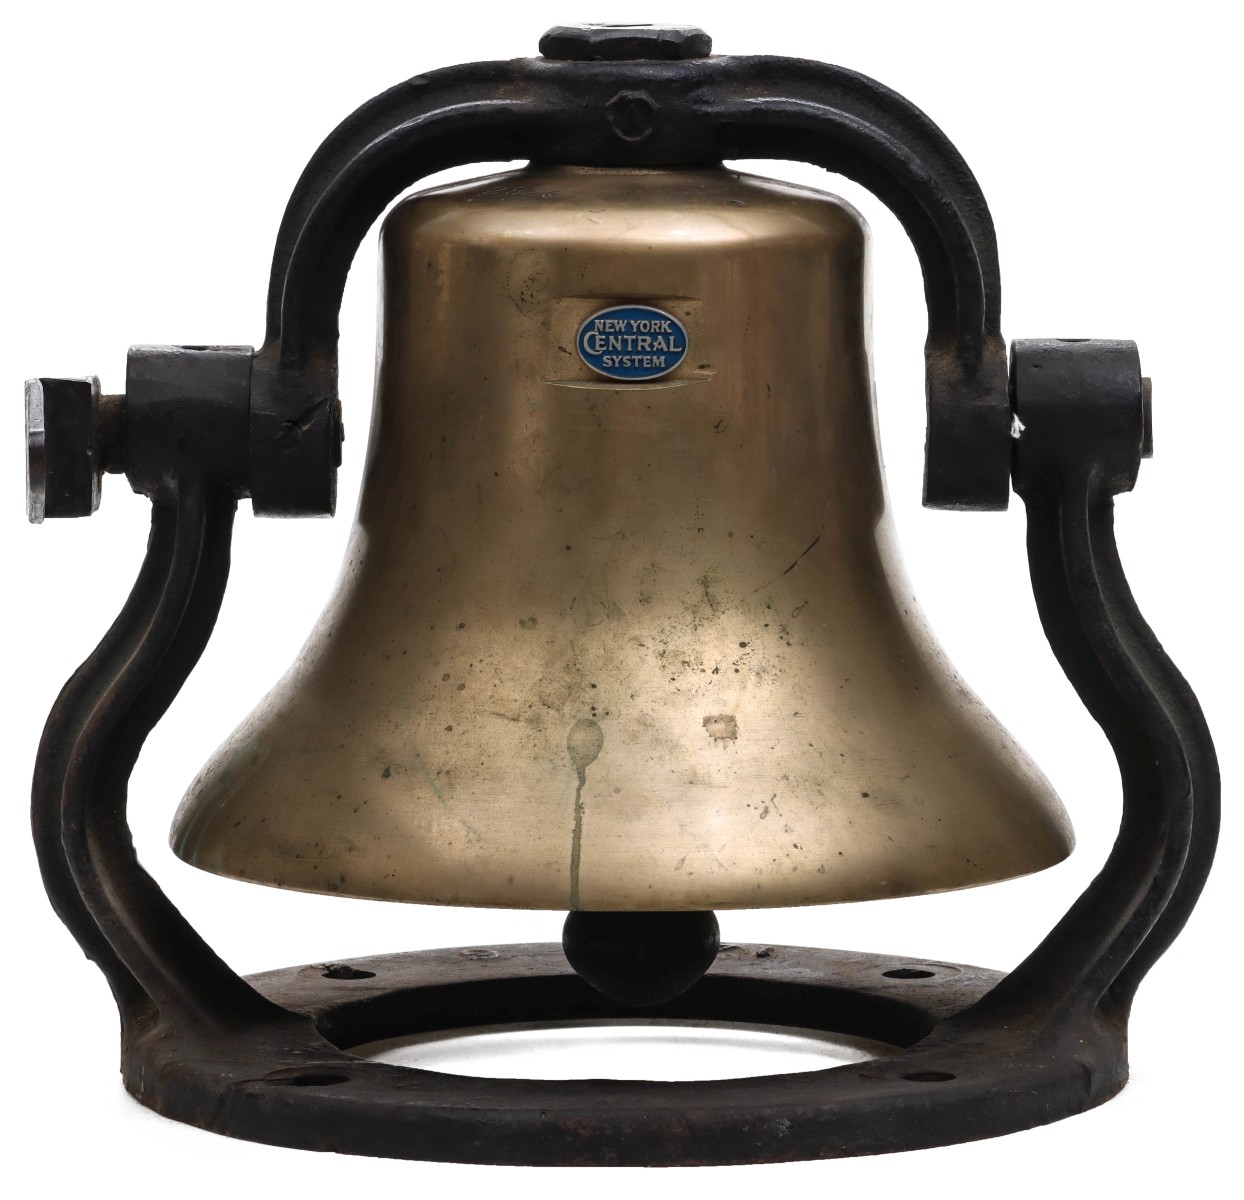 A NEW YORK CENTRAL LOCOMOTIVE BELL ATTR TO MOHAWK 2823